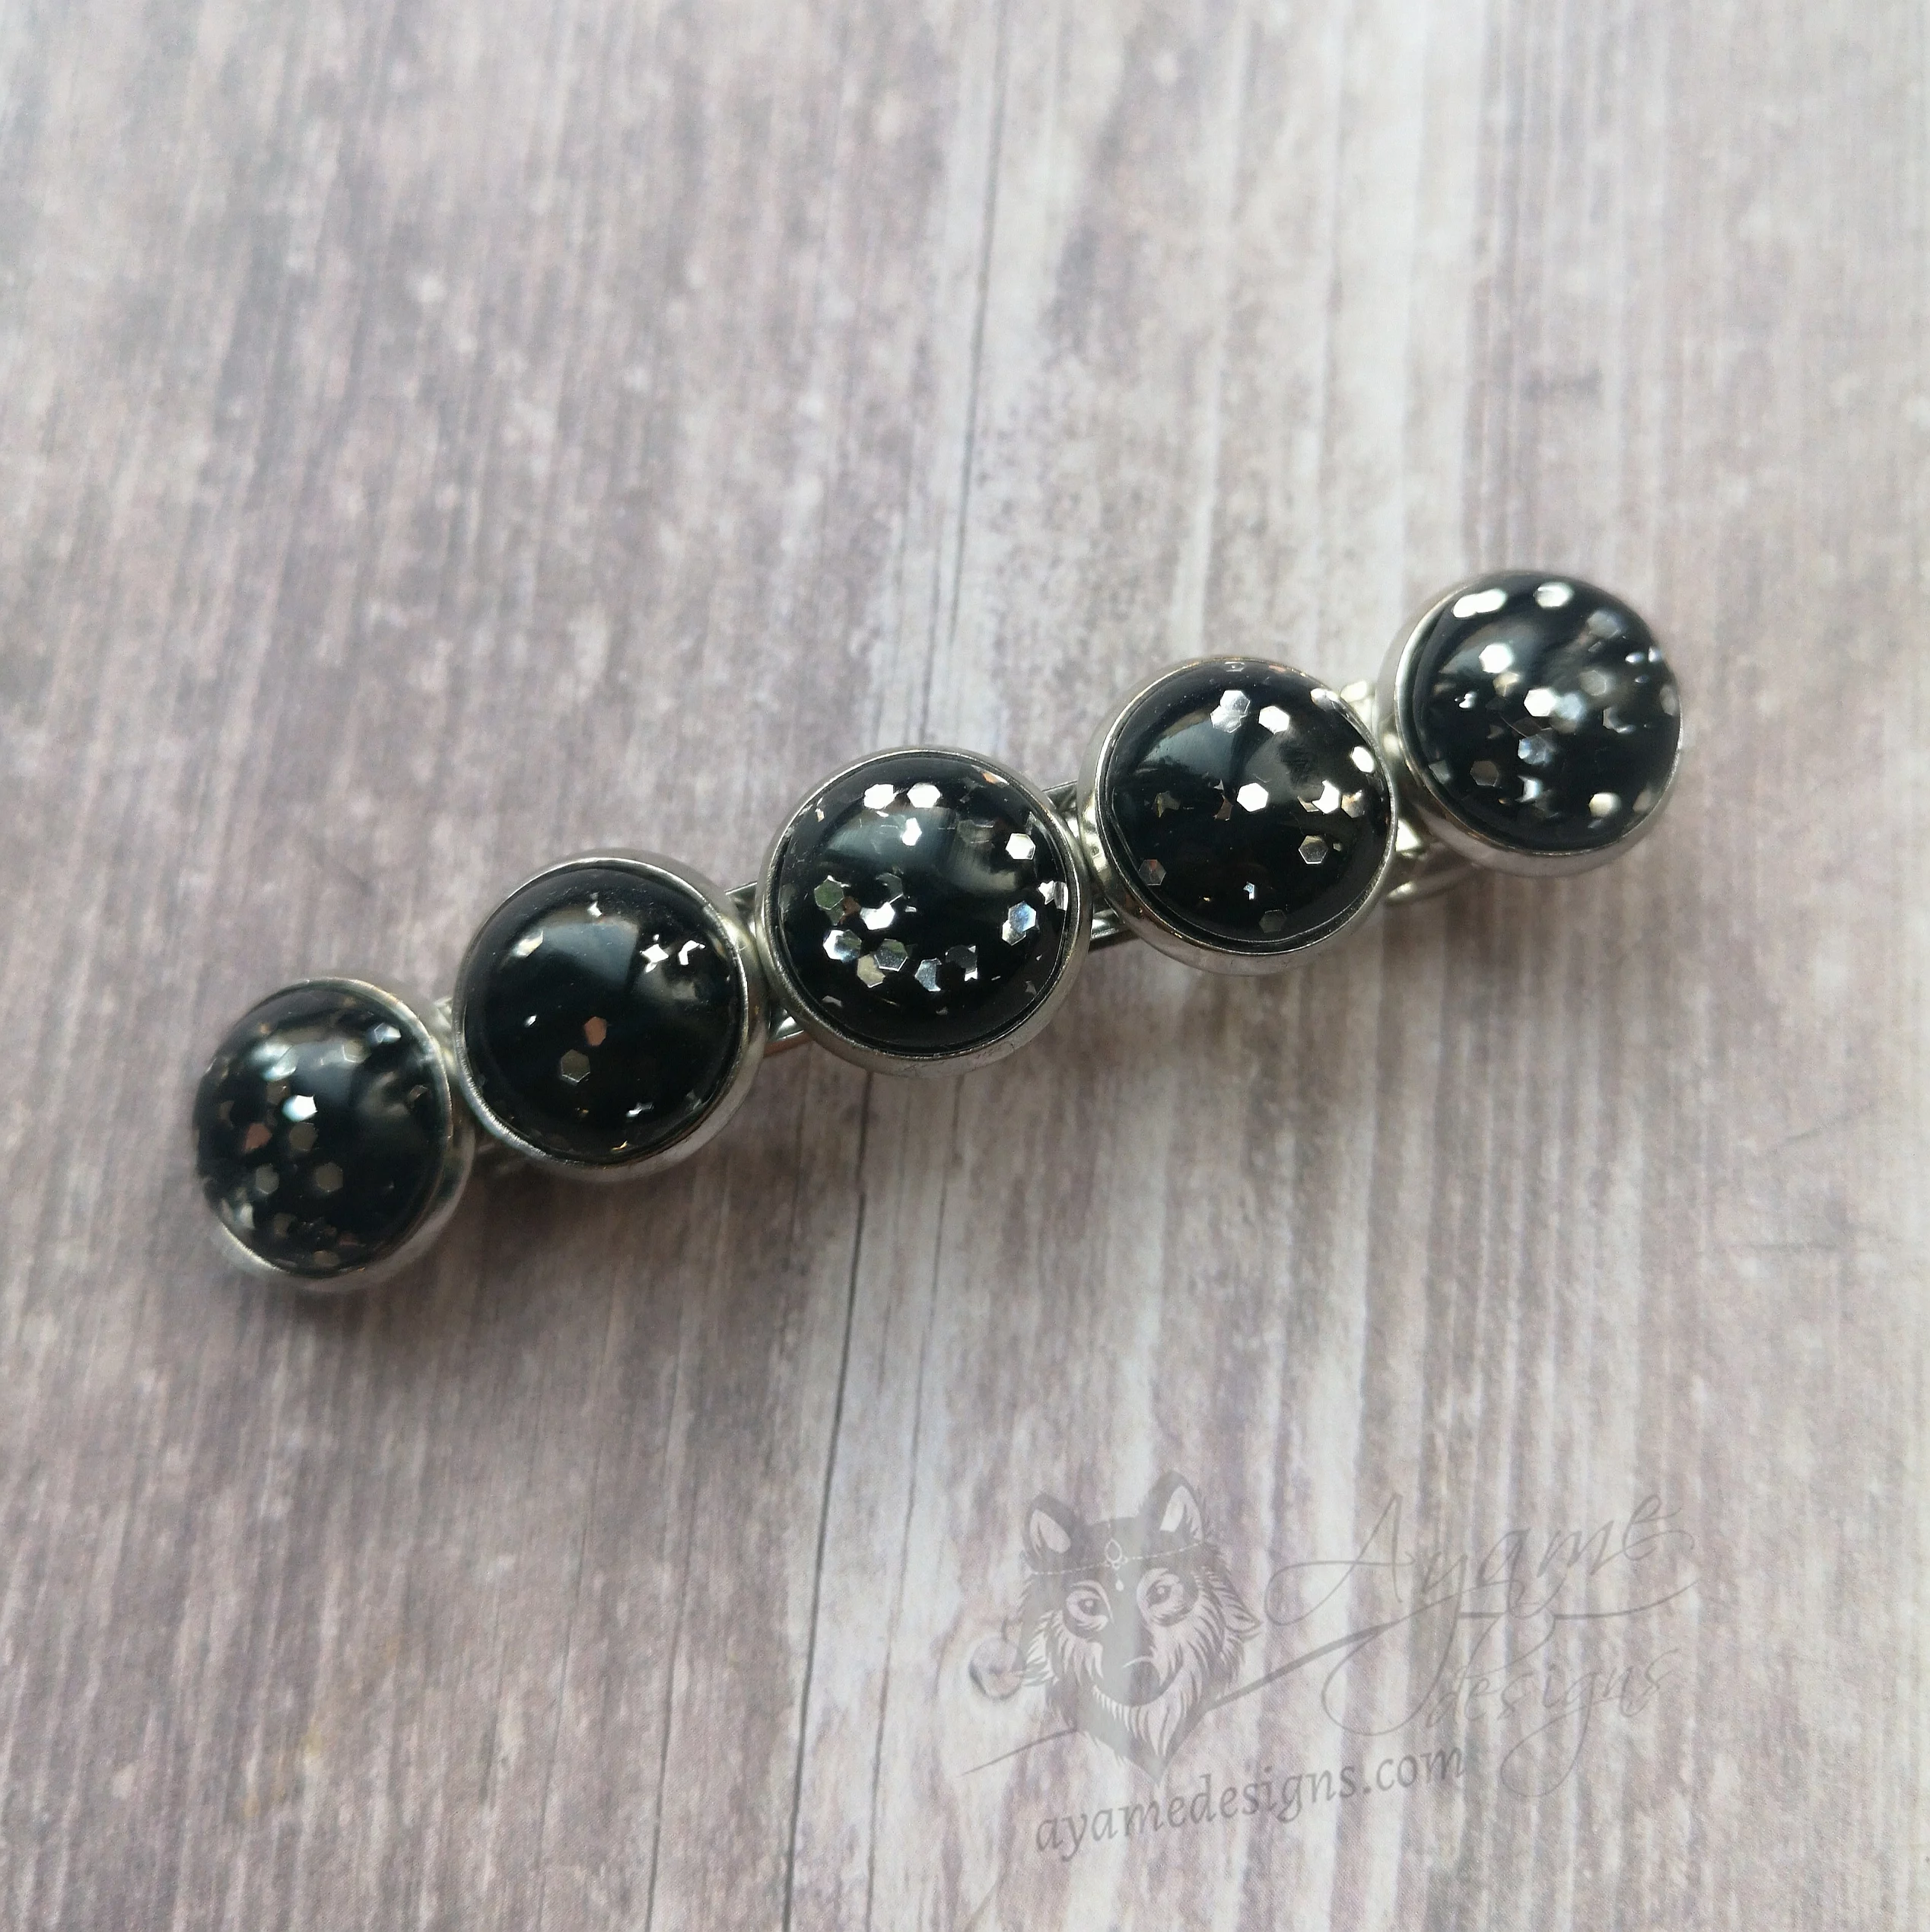 Hair barrette with black and glitter resin cabochons